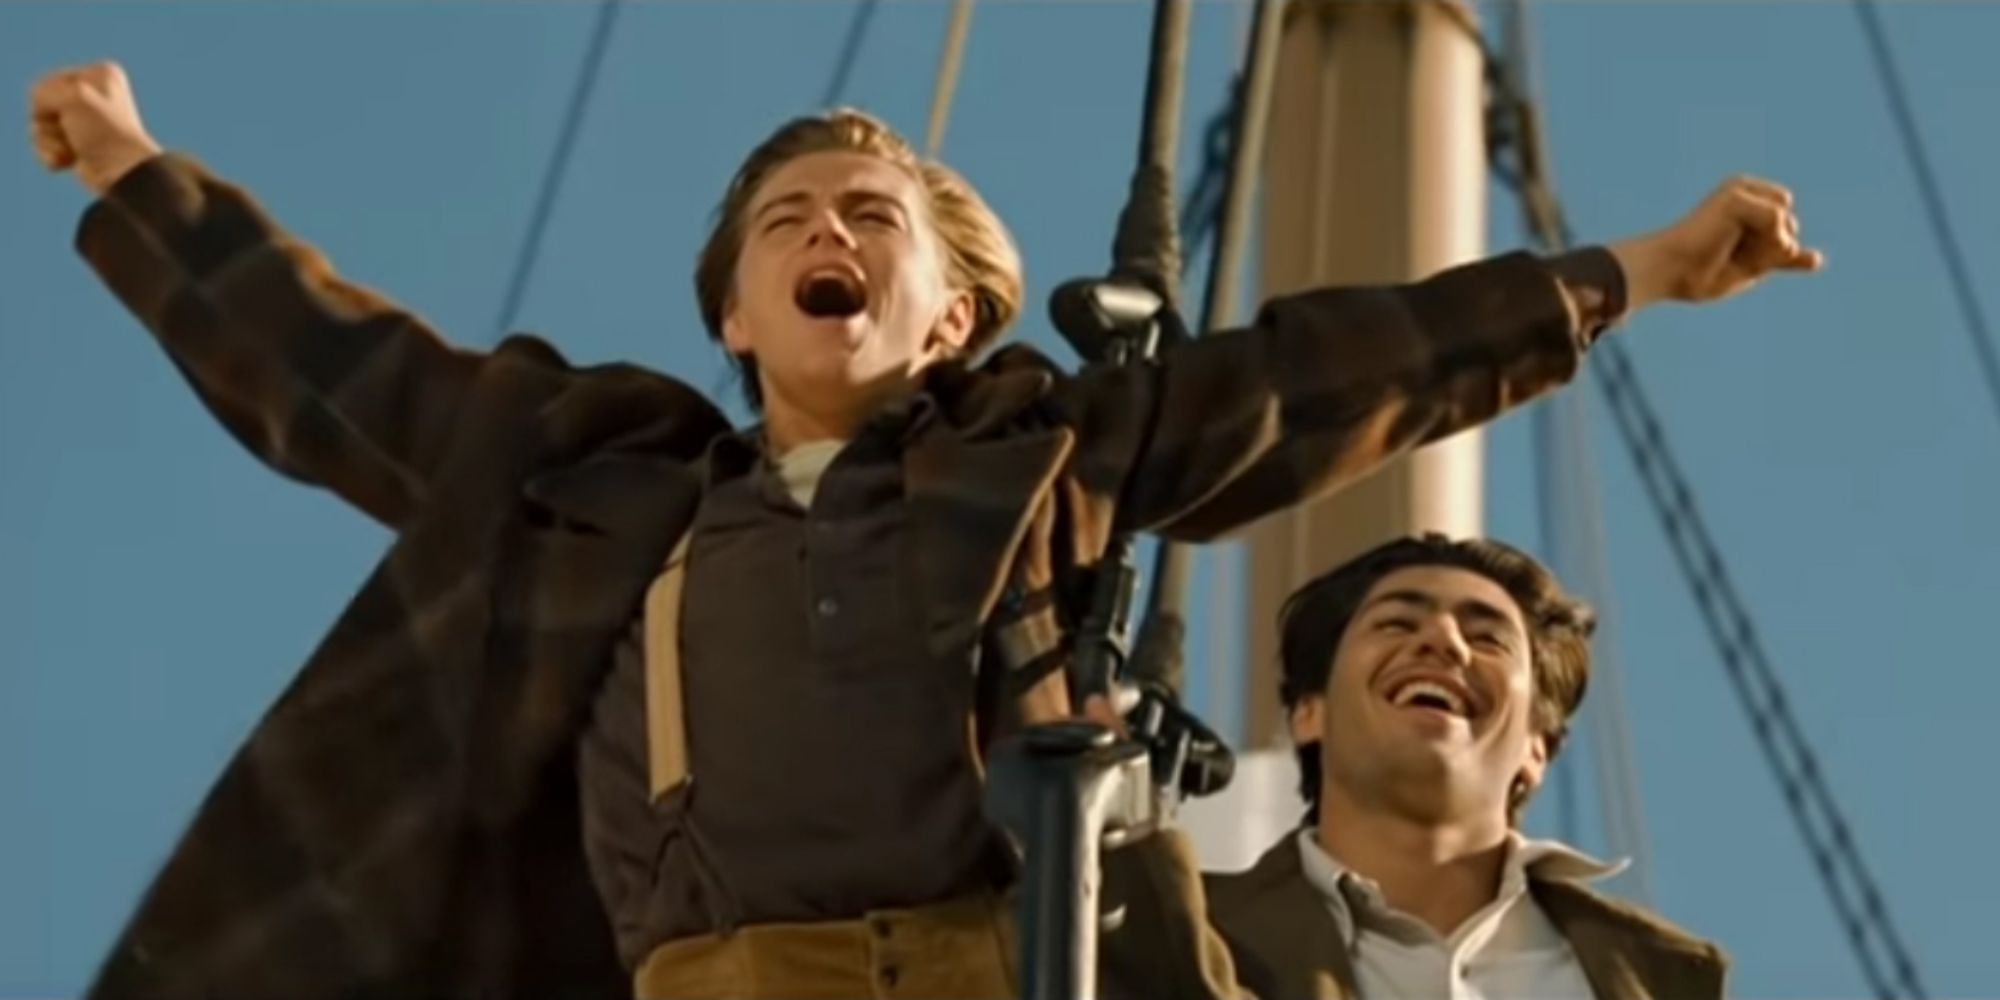 Jack Dawson and his Italian friend shout towards the sea on the bow of the Titanic